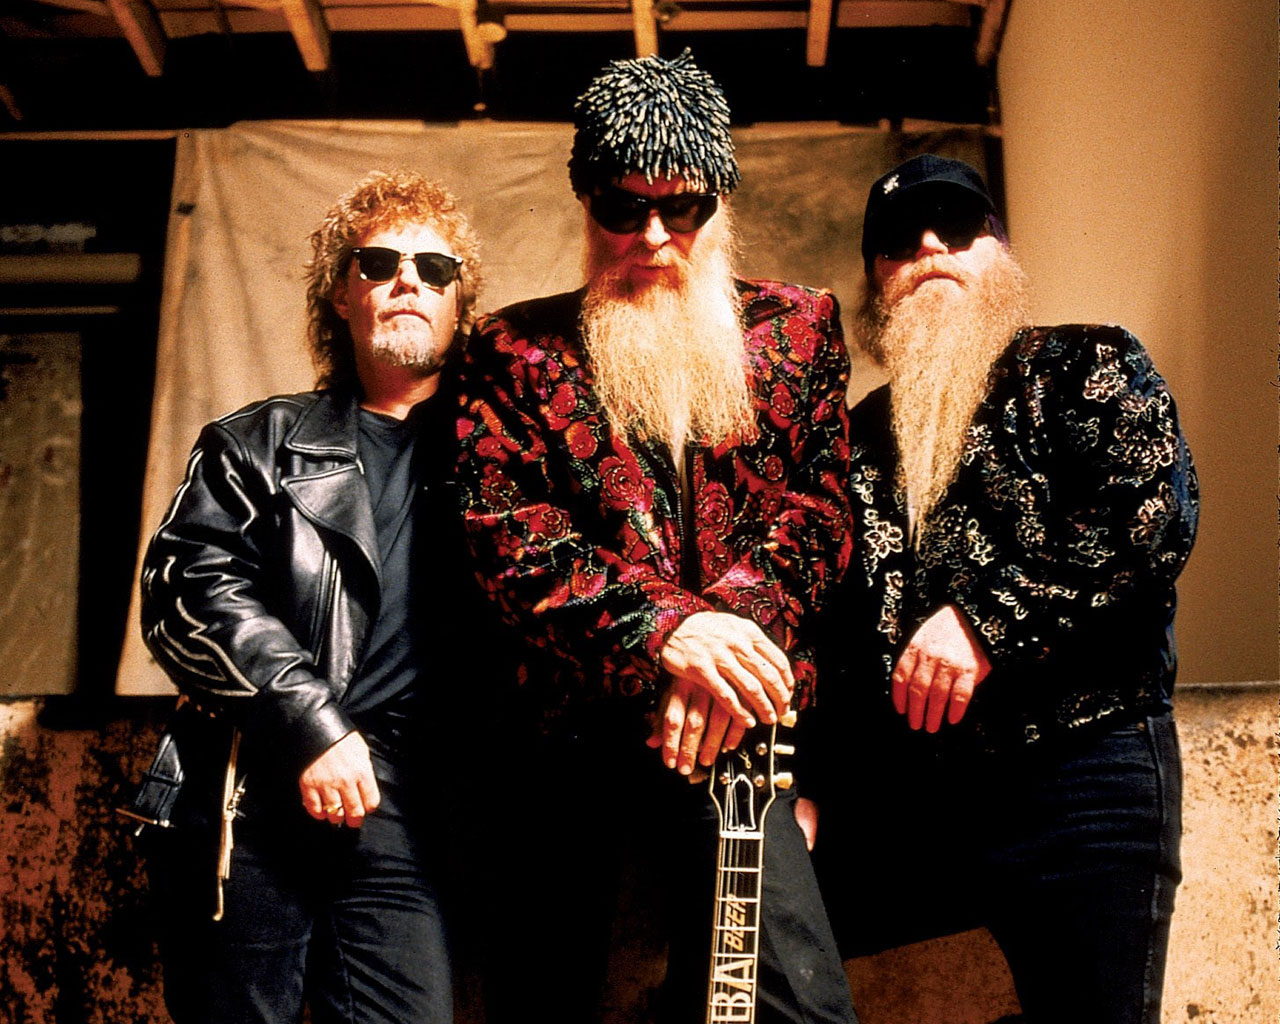 ZZ Top is like ACDC. Everybody loves them.